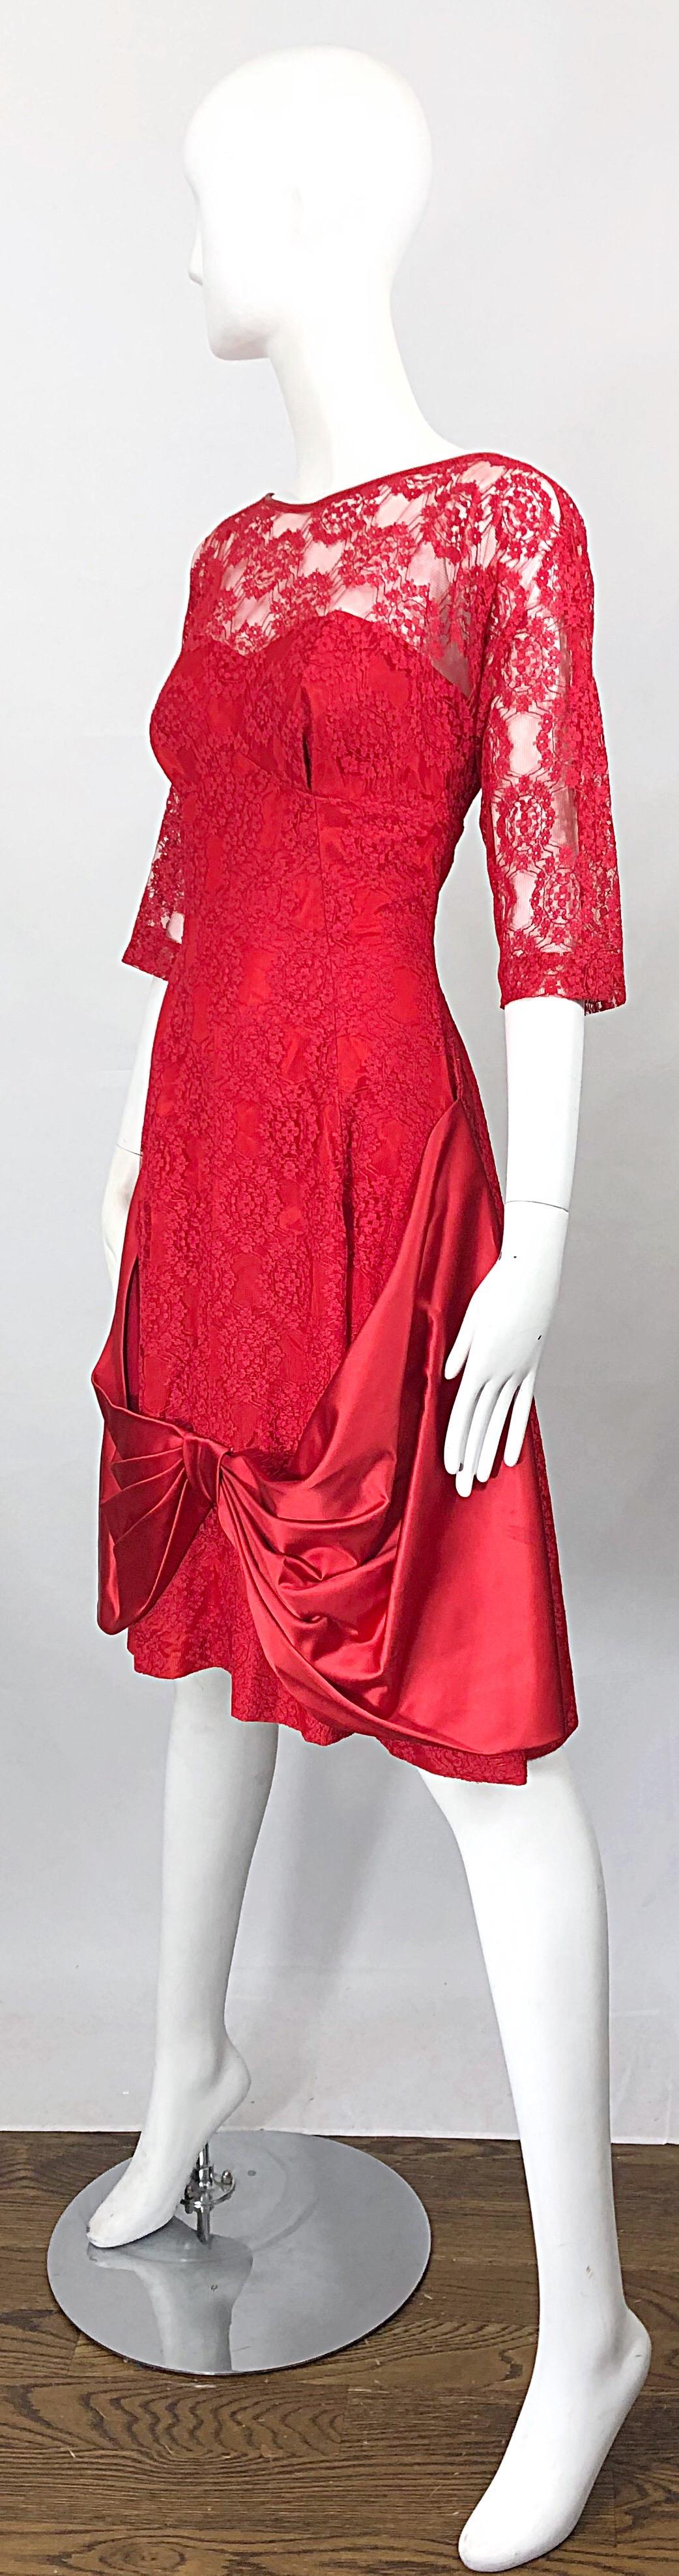 1950s Demi Couture Lips Stick Red Silk Lace 3/4 Sleeve Vintage 50s Dress For Sale 3